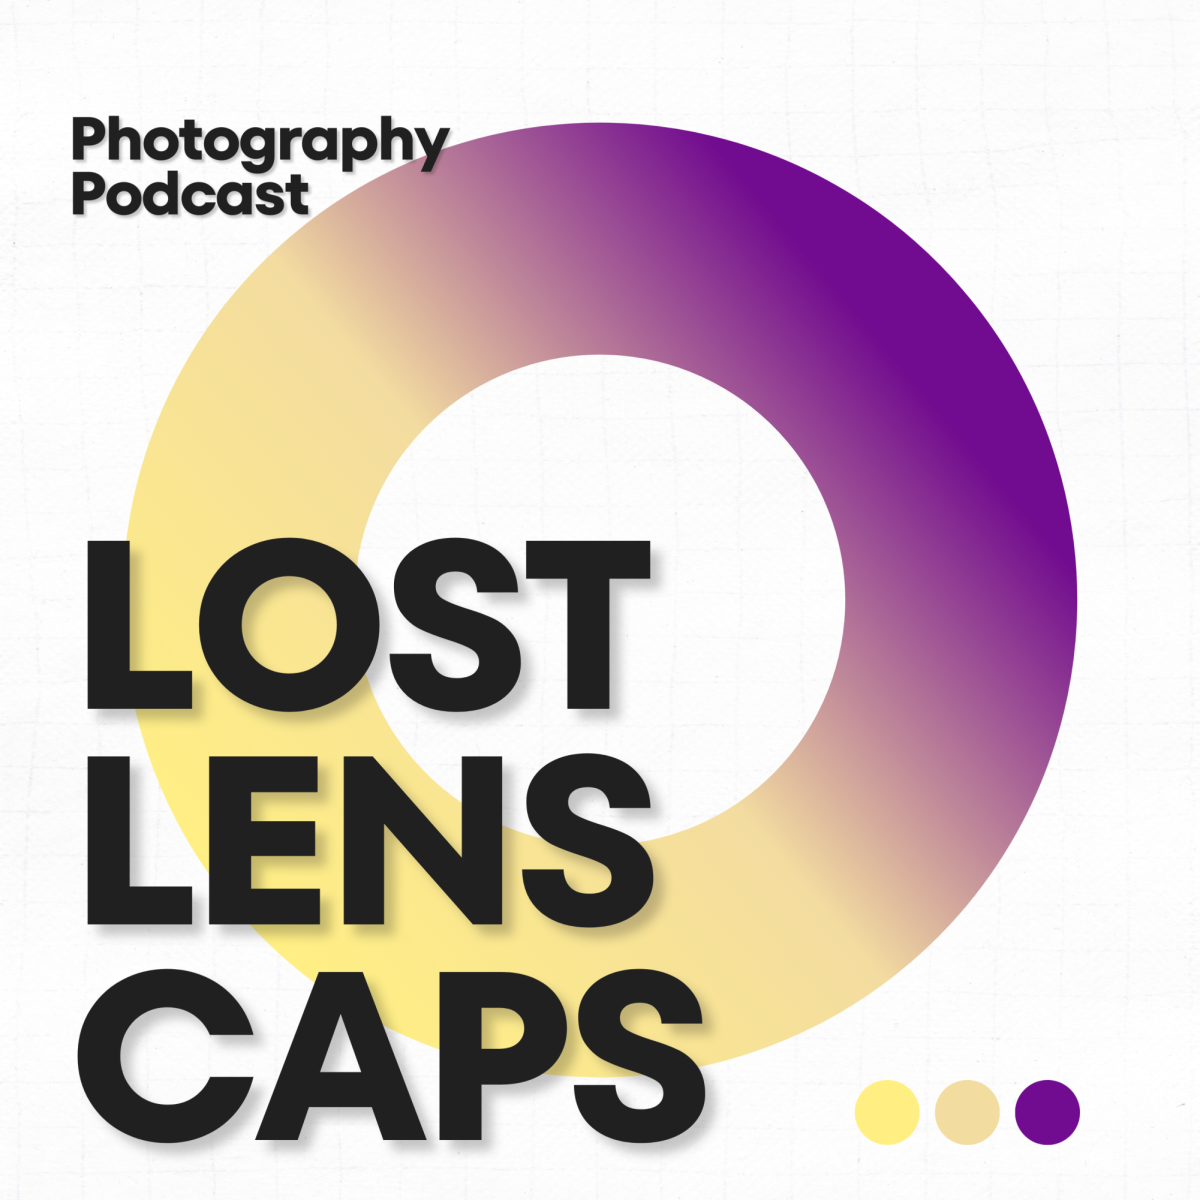 Lost Lens Caps Photography Podcast. Cover designed by Jacob Rice.